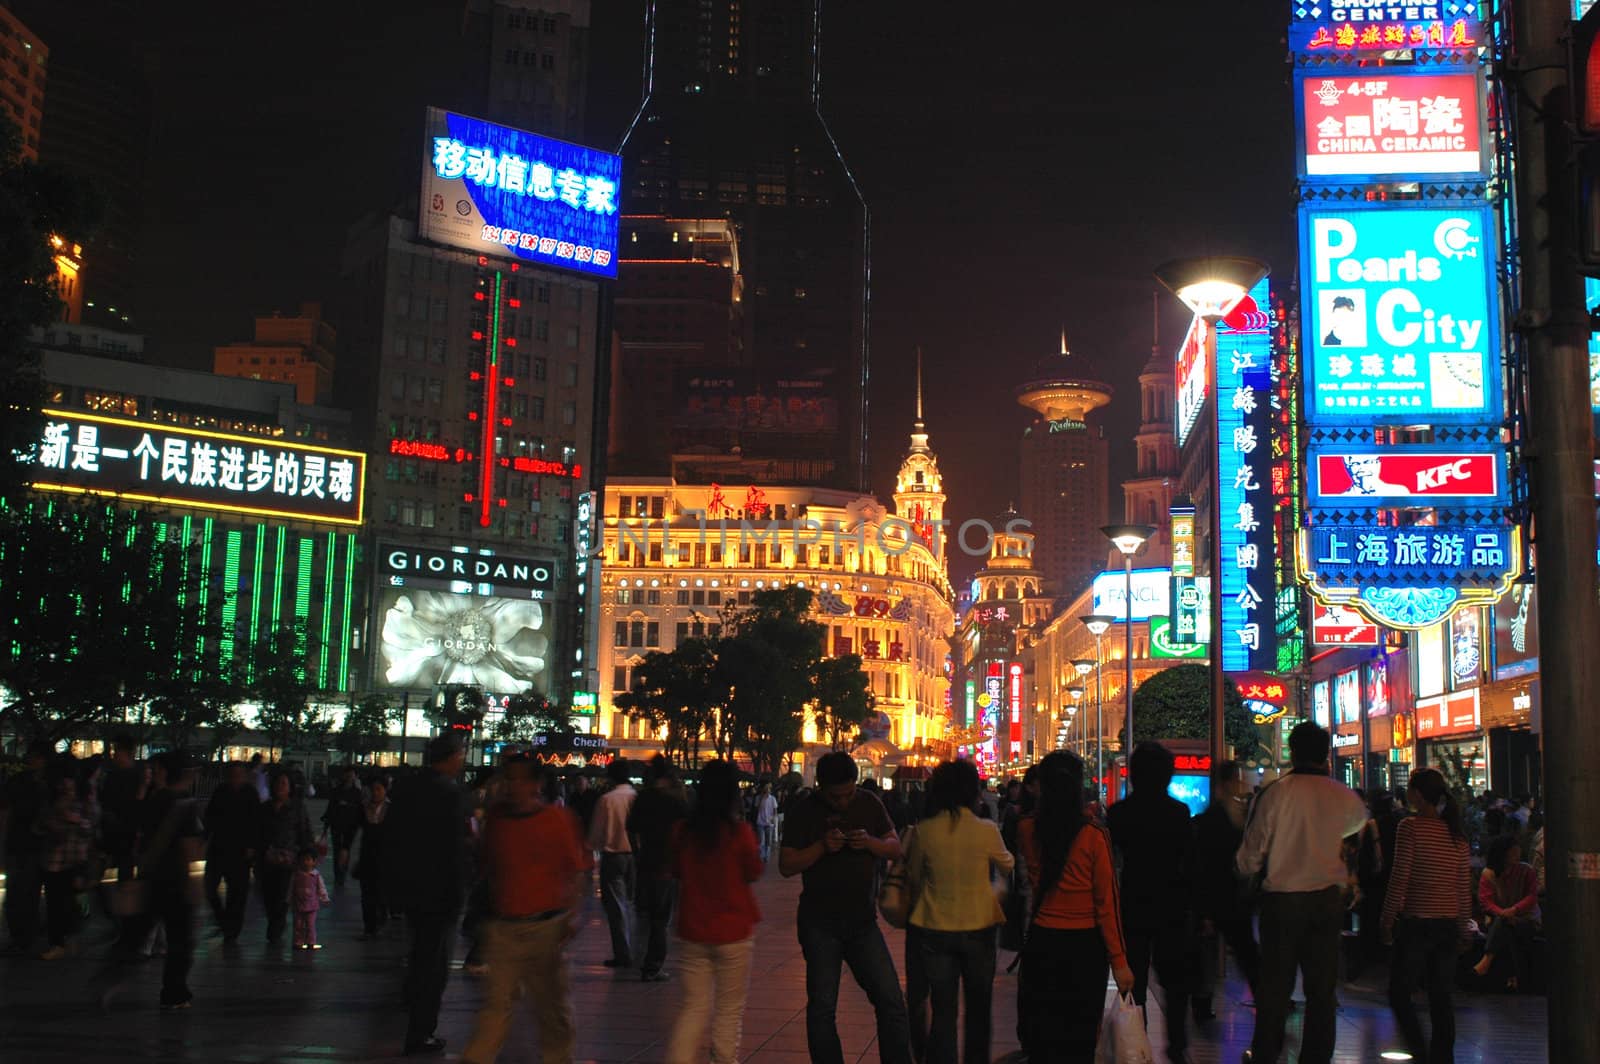 CHINA, SHANGHAI, NANJING ROAD - MAY 12, 2007: shopping paradise in China, famous Nanjing Lu with thousands of shops, neon lights, crowd of people.